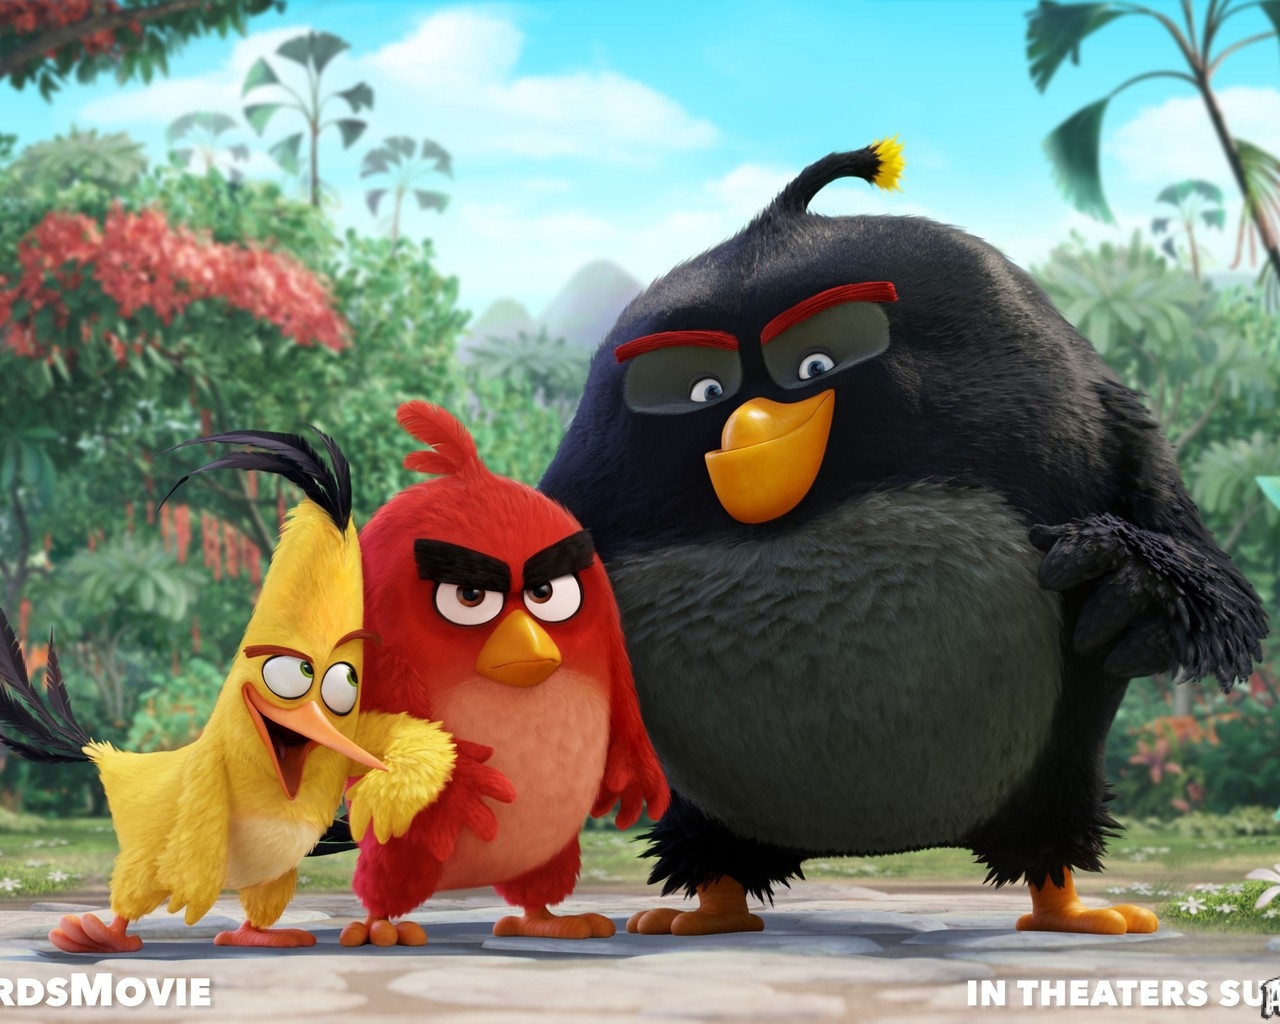 Angry Birds Movie for 1280 x 1024 resolution